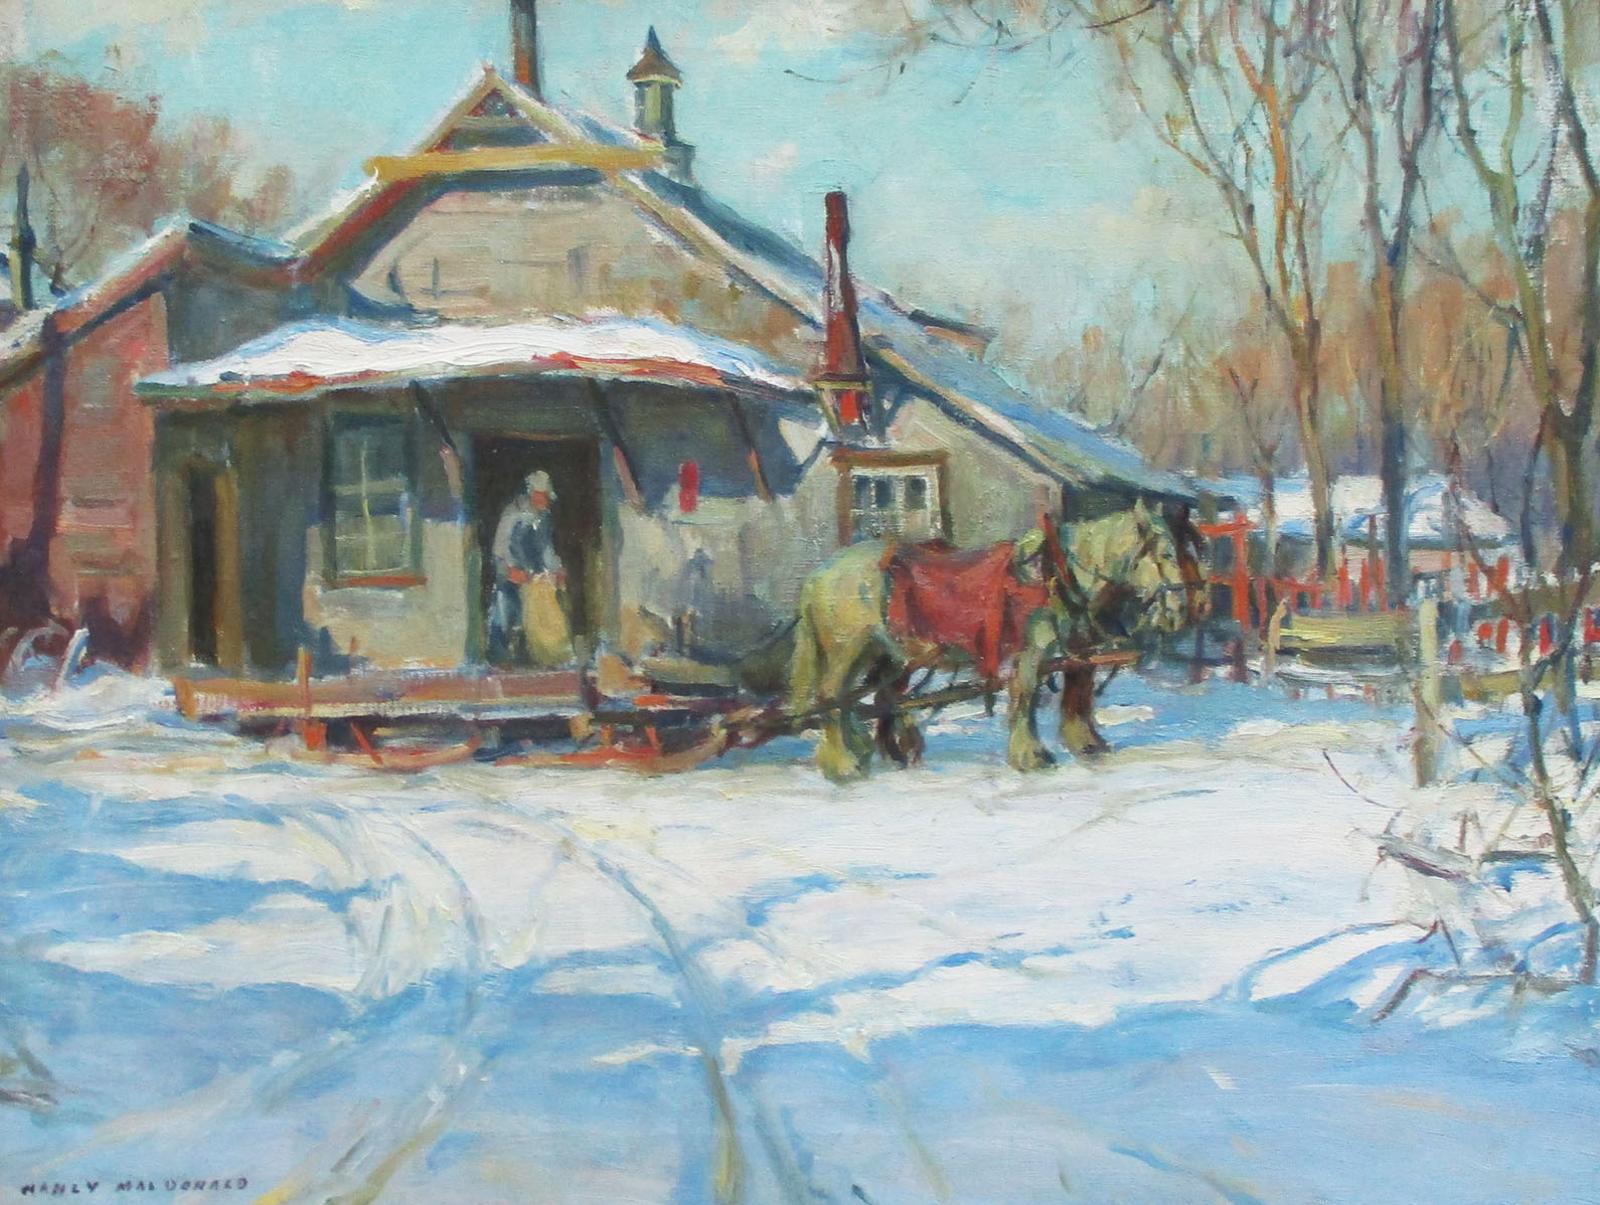 Manly Edward MacDonald (1889-1971) - Horse drawn wagon by a cottage